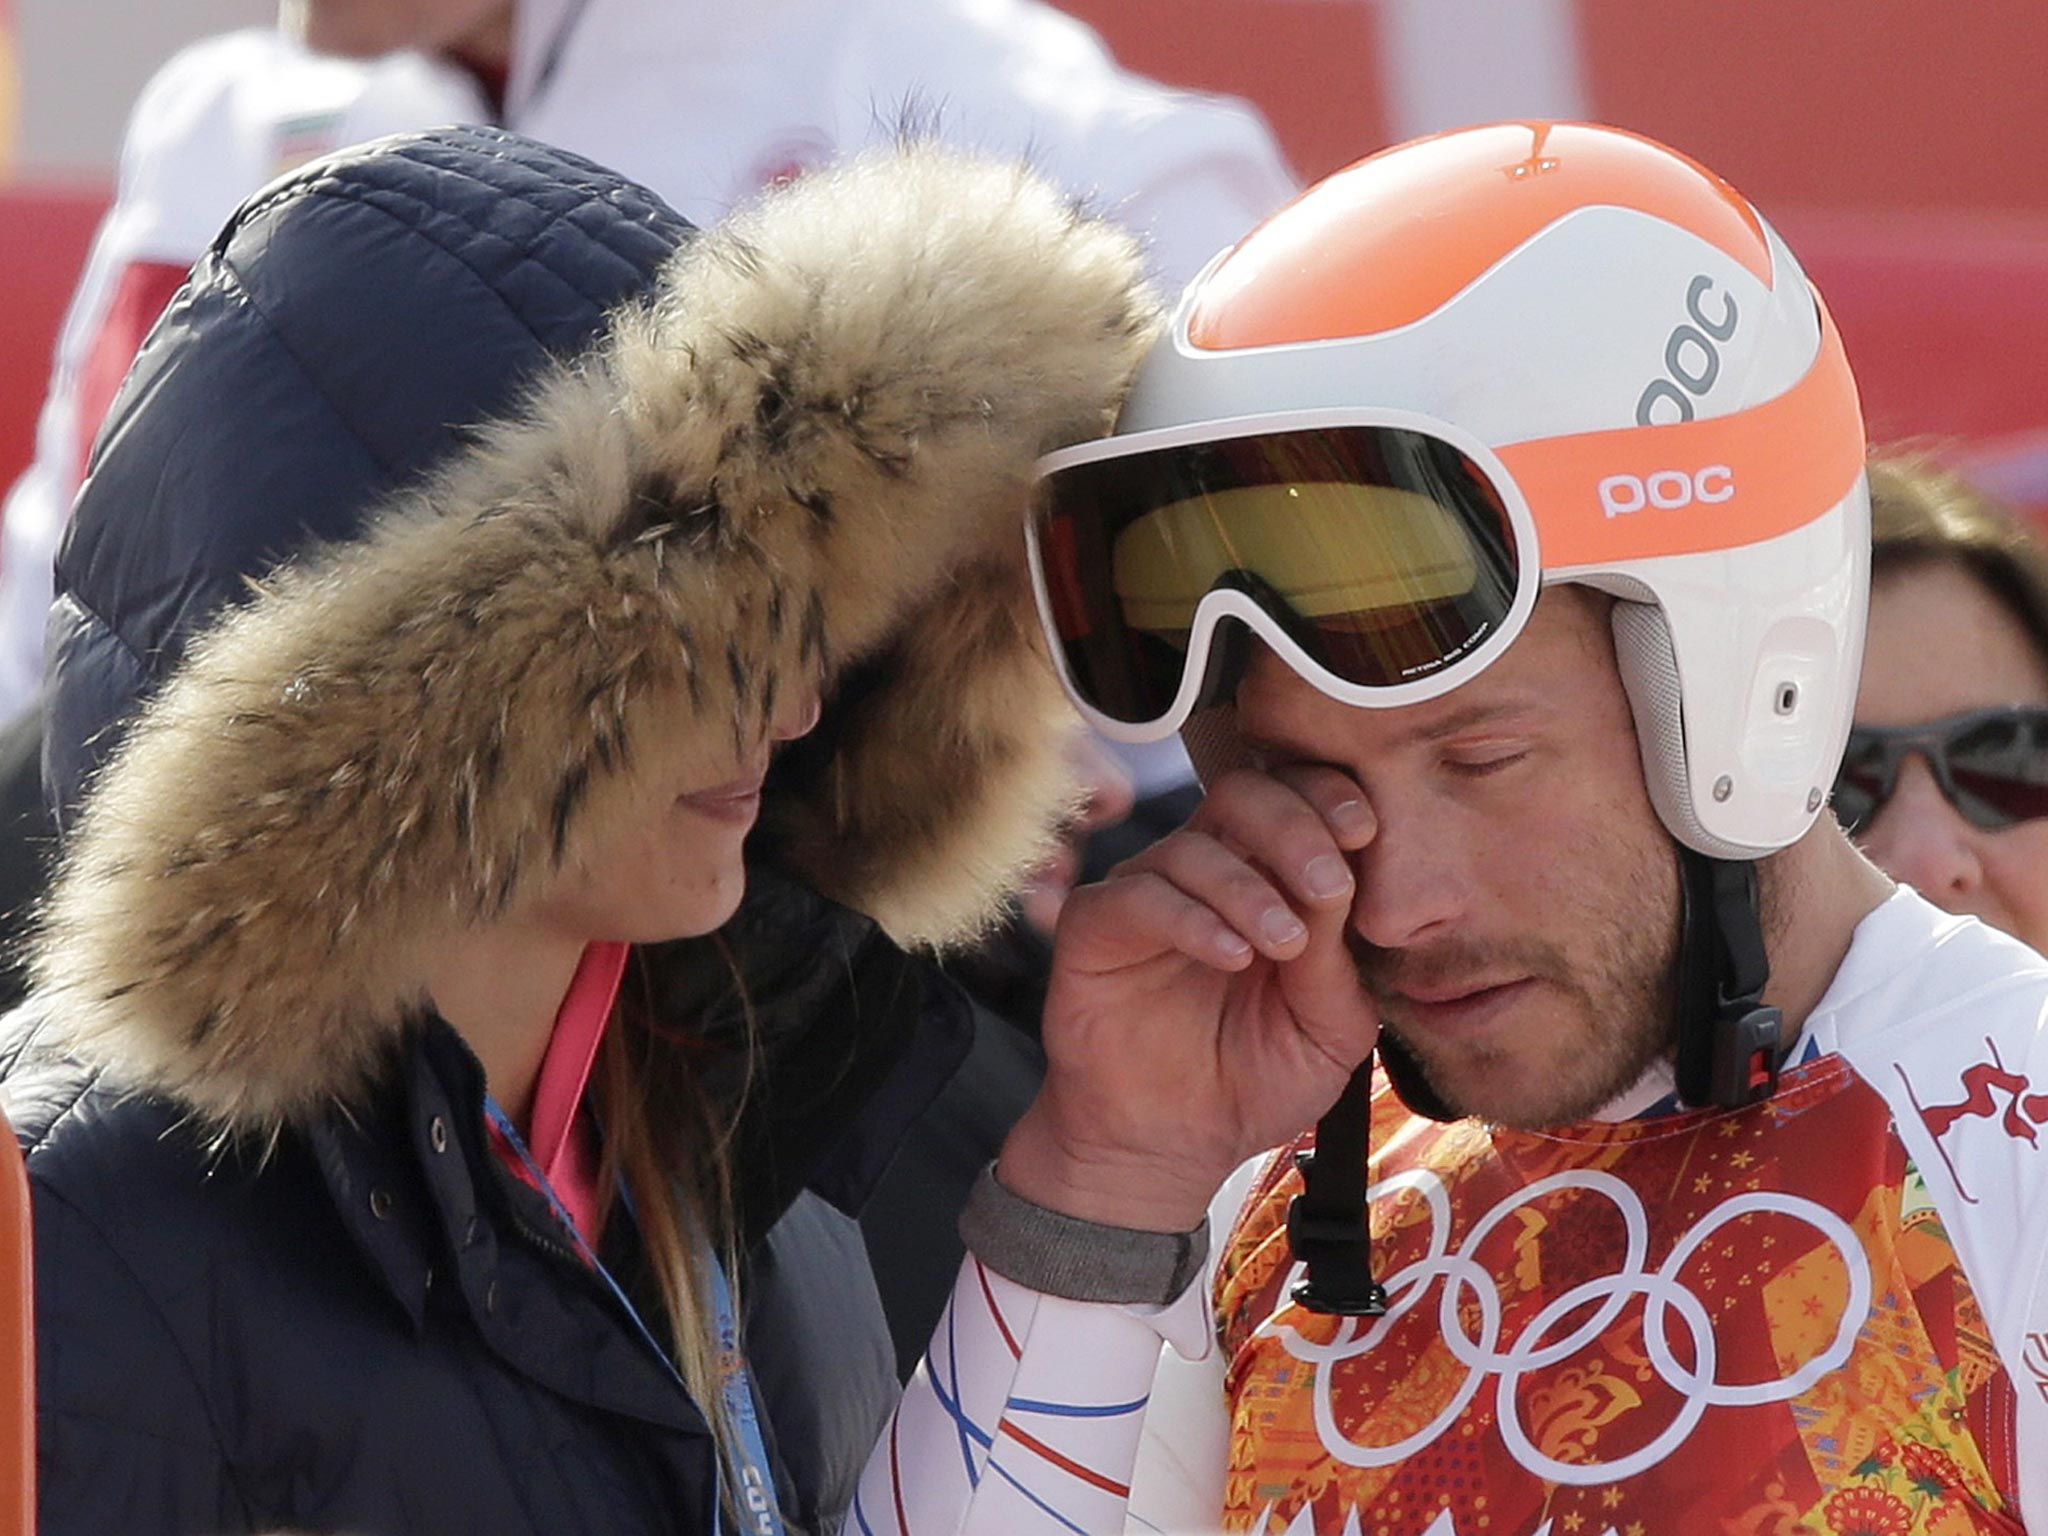 US skier Bode Miller is consoled by his wife after securing a share of bronze in the men’s Super-G. The 36-year-old, who has endured a troubled Games, lost his younger brother last year. “It was a lot of emotion,” he said. “To have things go well today...